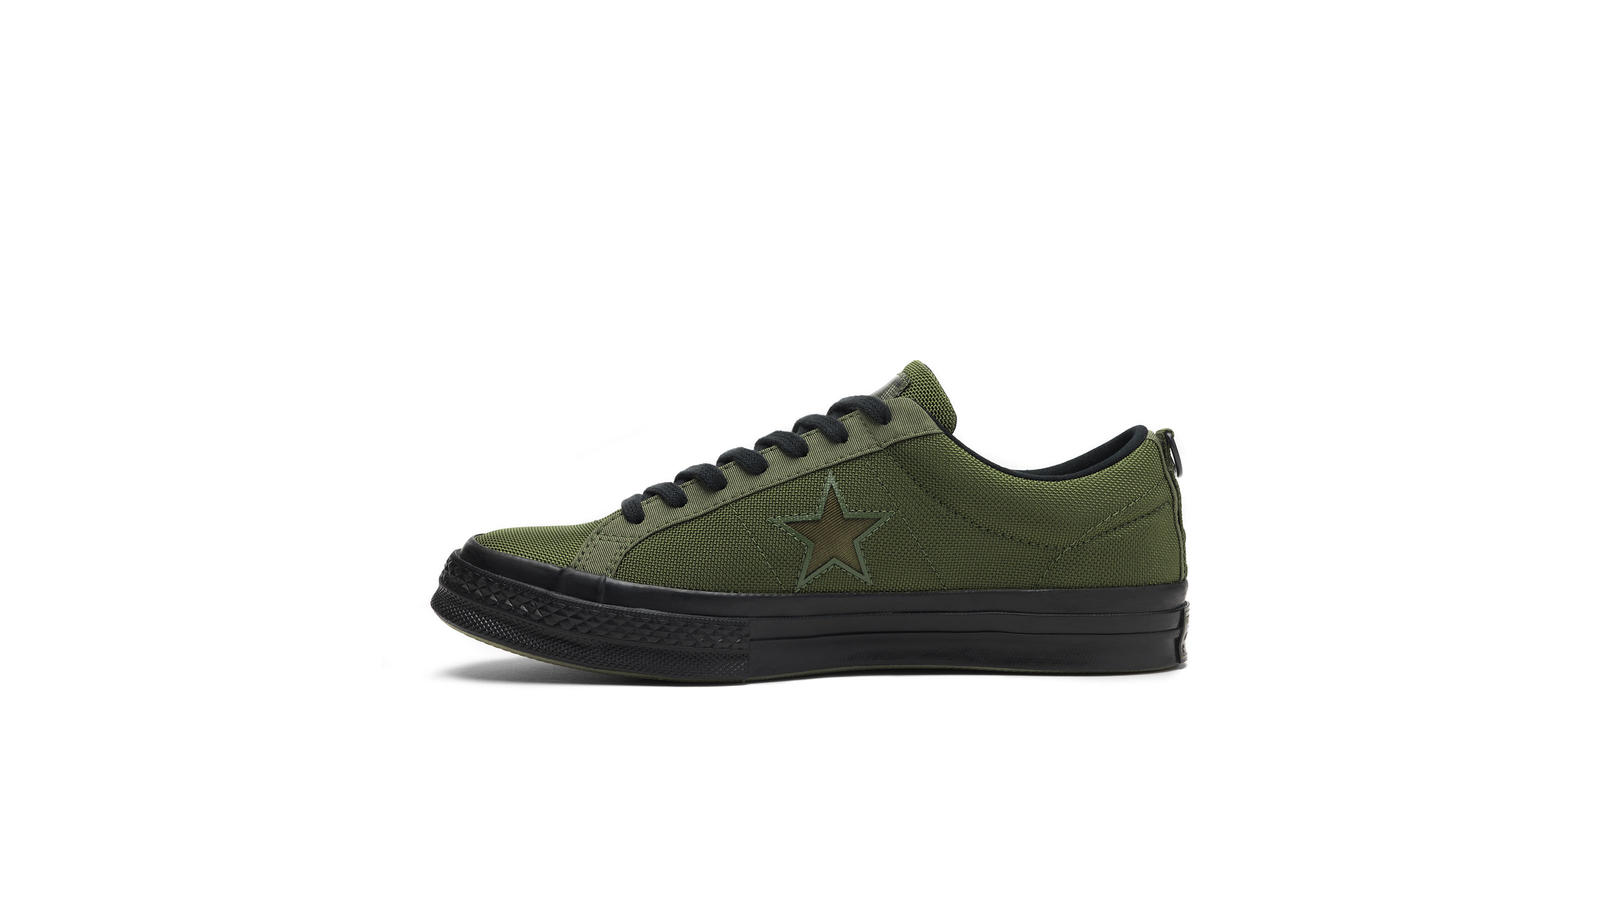 Converse X Carhartt Wip One Star Collection - Skate Shoe , HD Wallpaper & Backgrounds